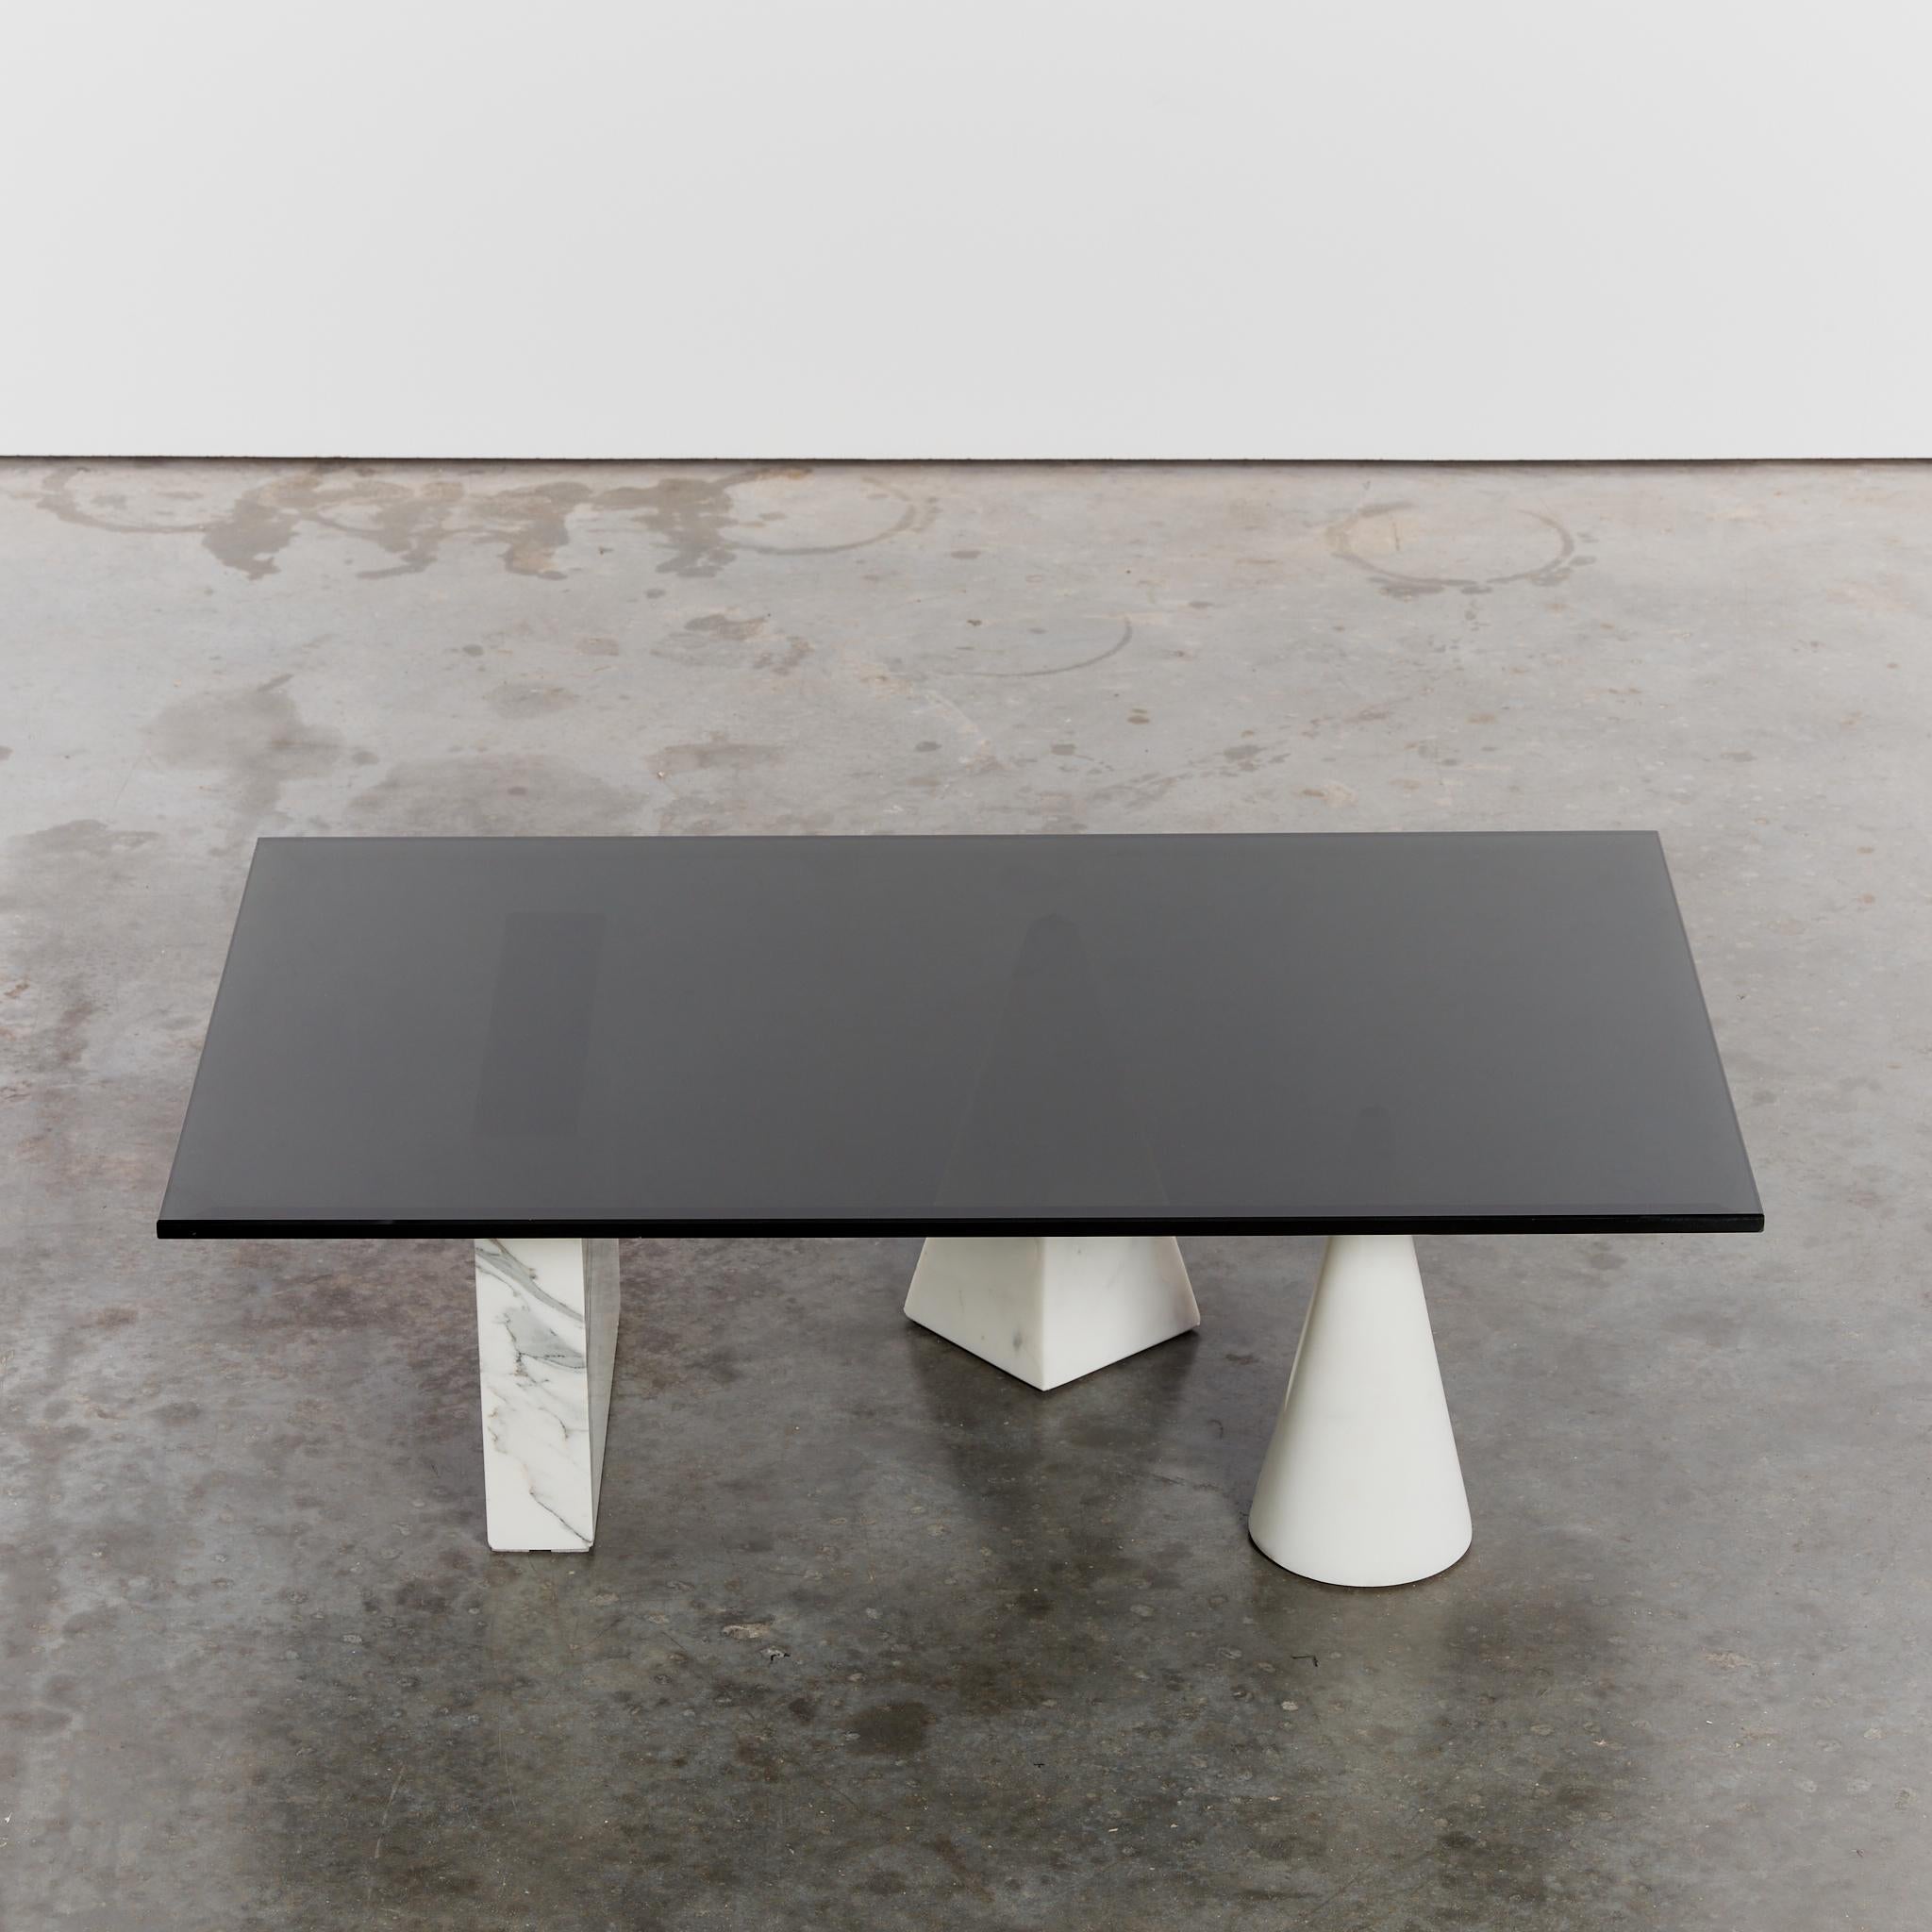 Metafora Style Marble Occasional Coffee Table Attributed to Massimo Vignelli In Good Condition For Sale In London, GB